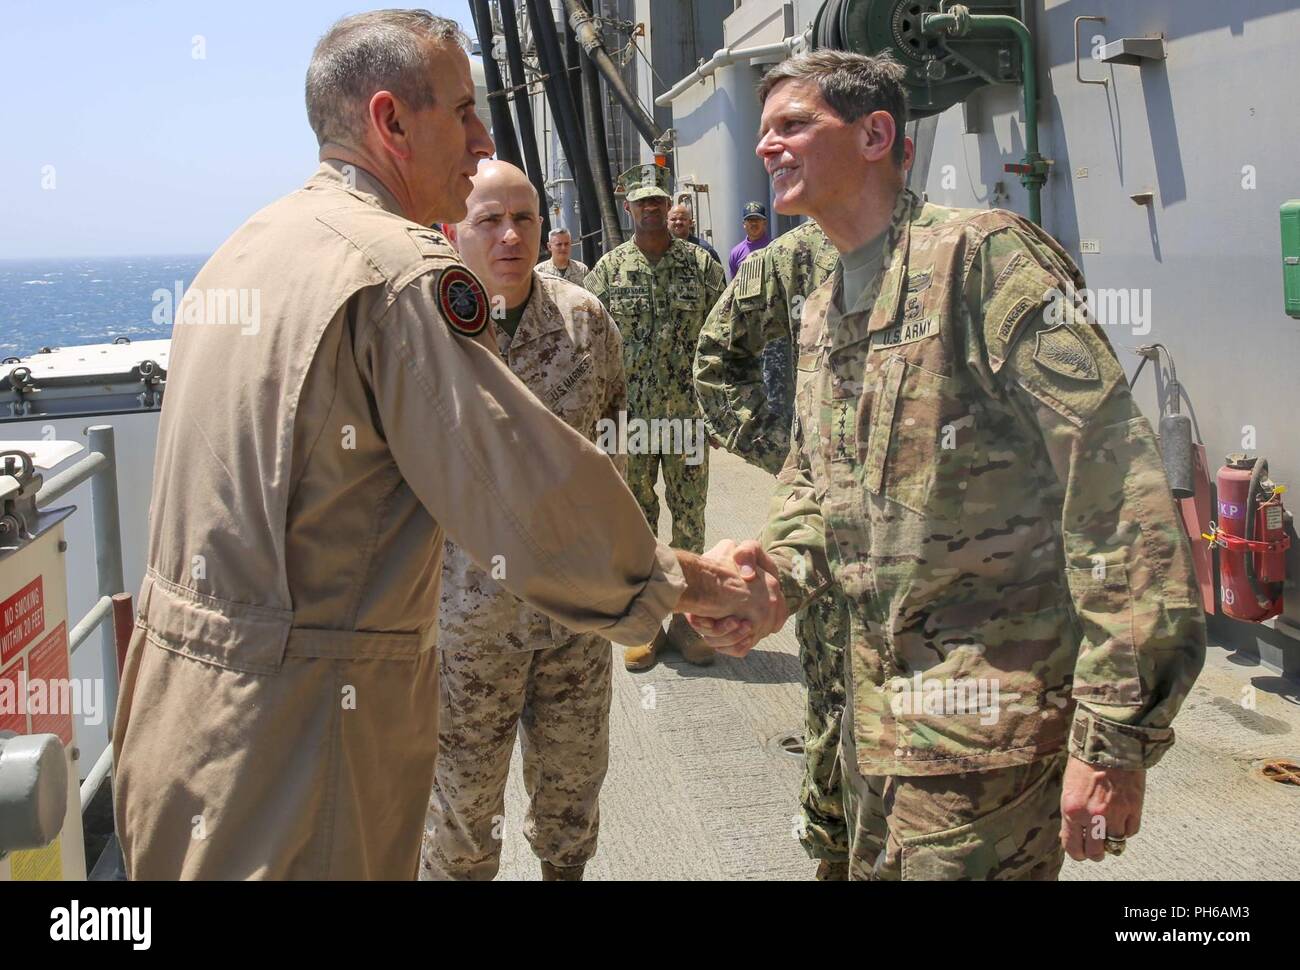 ARABIAN GULF (June 22, 2018) U.S. Army Gen. Joseph Votel, commander, U.S. Central Command,  greets Capt. Joseph O’Brien, Commanding Officer of the USS Iwo Jima, aboard the Wasp-class amphibious assault ship USS Iwo Jima (LHD 7), June 22, 2018. Votel, Vice Adm. Scott Stearney, commander, U.S. Naval Forces Central Command, and other distinguished visitors took a tour of Iwo Jima and spoke with crew members and Marines with the 26th Marine Expeditionary Unit, who are currently deployed to the U.S. 5th Fleet of operations in support of maritime security operations to reassure allies and partners a Stock Photo